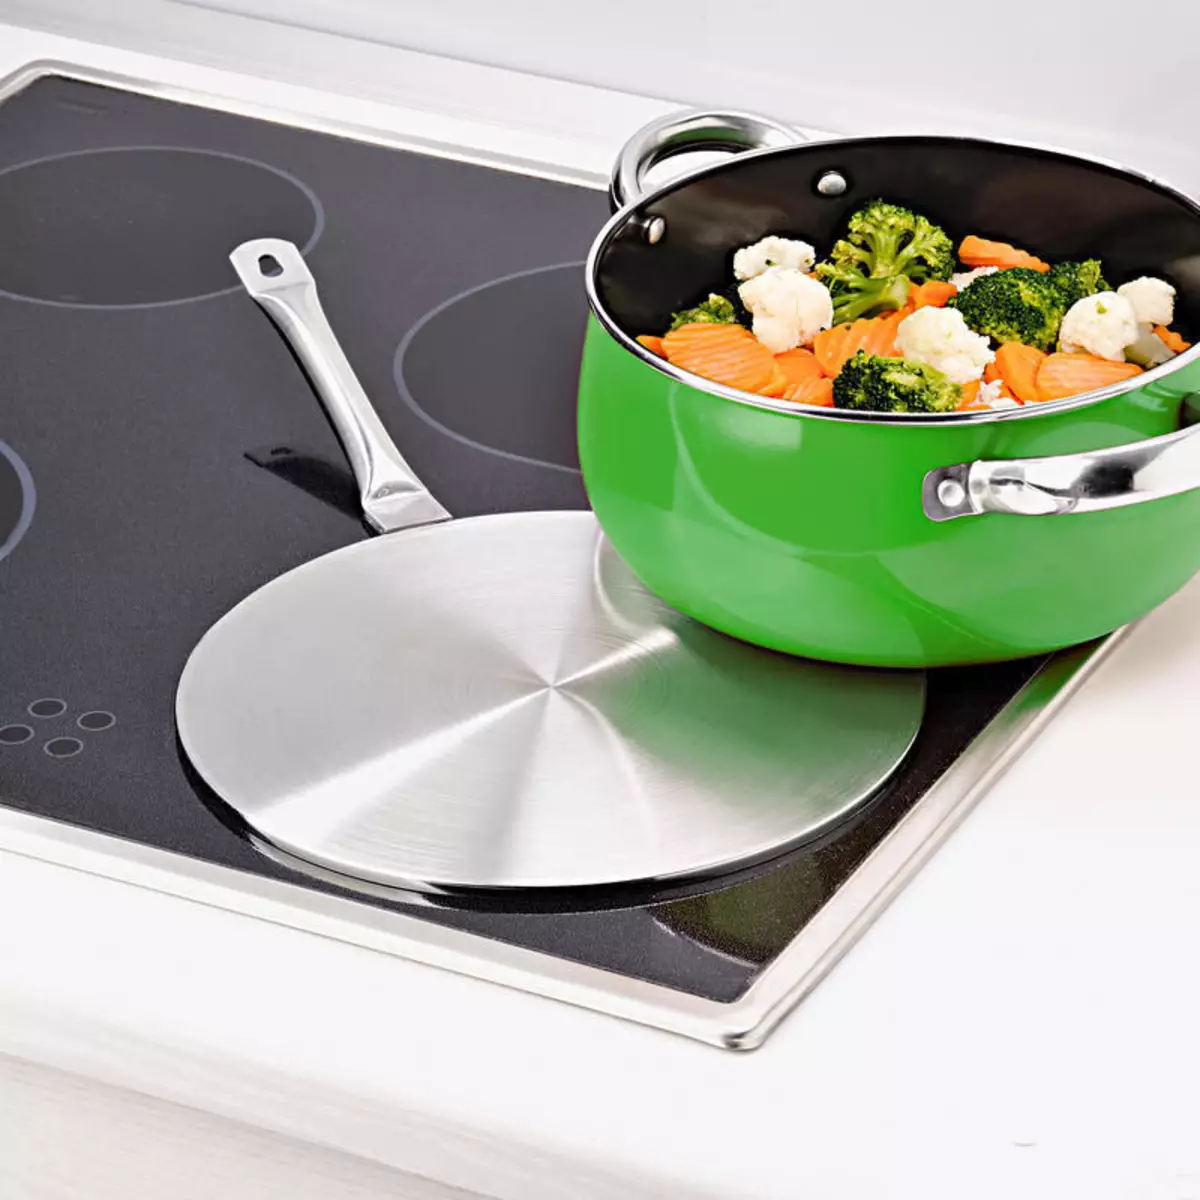 How to choose a saucepan? Rating of the best manufacturers. What are the most harmless materials? 10786_18